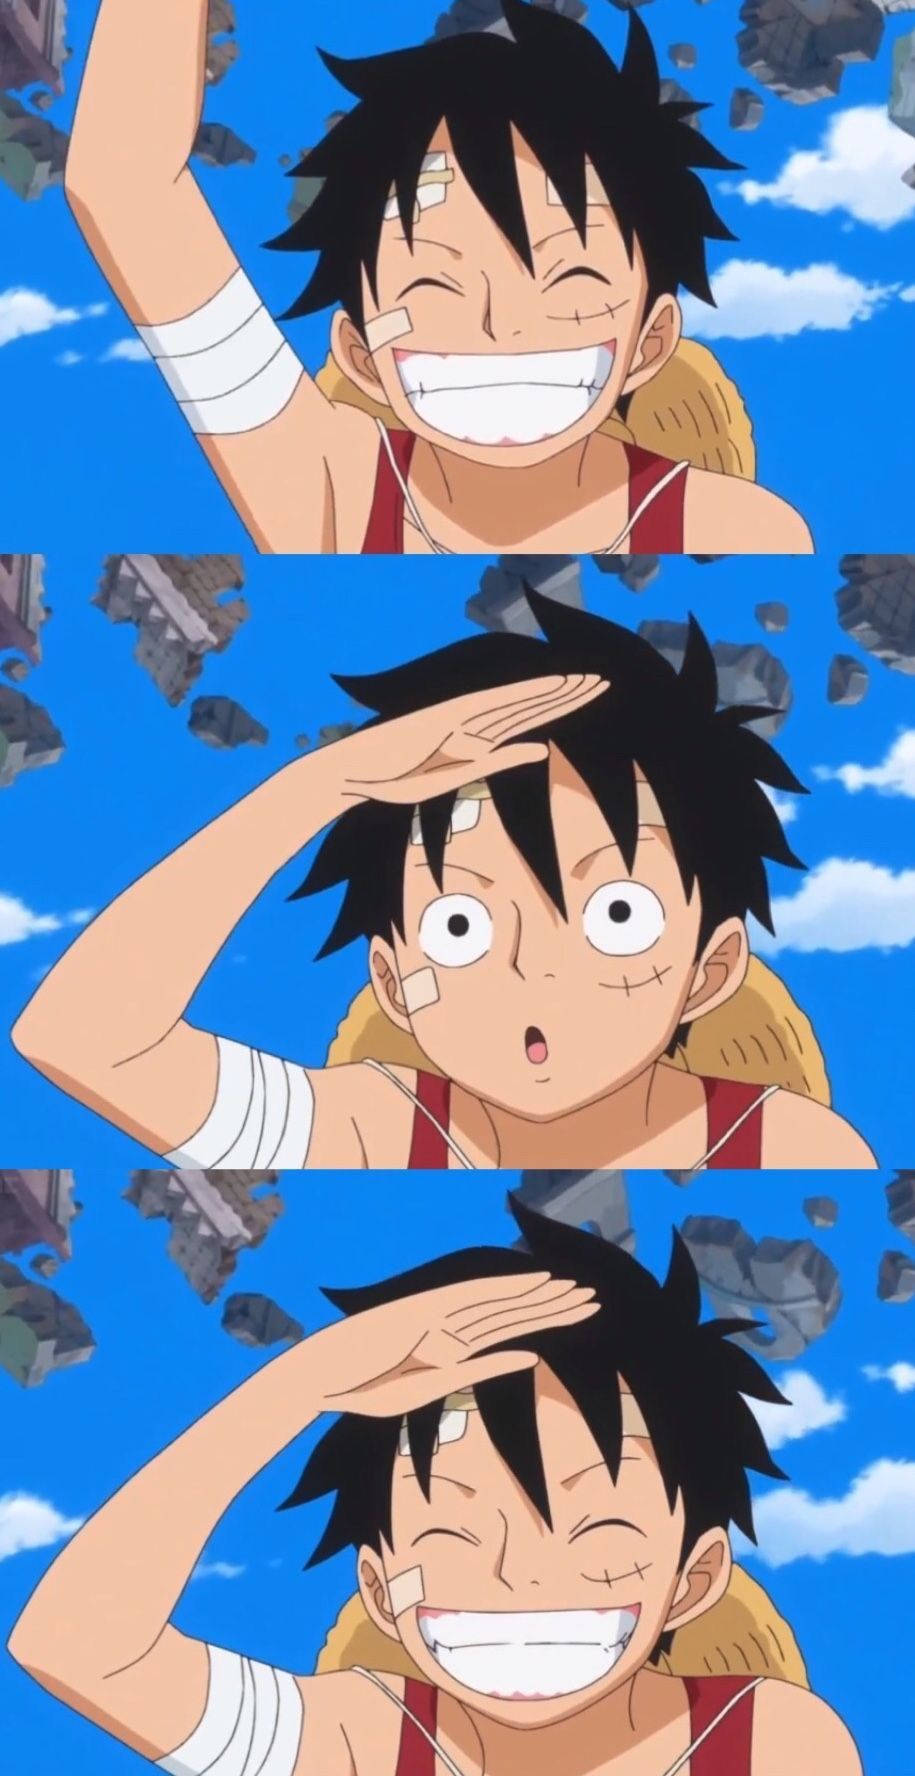 Luffy Smile With Hand On His Forehead